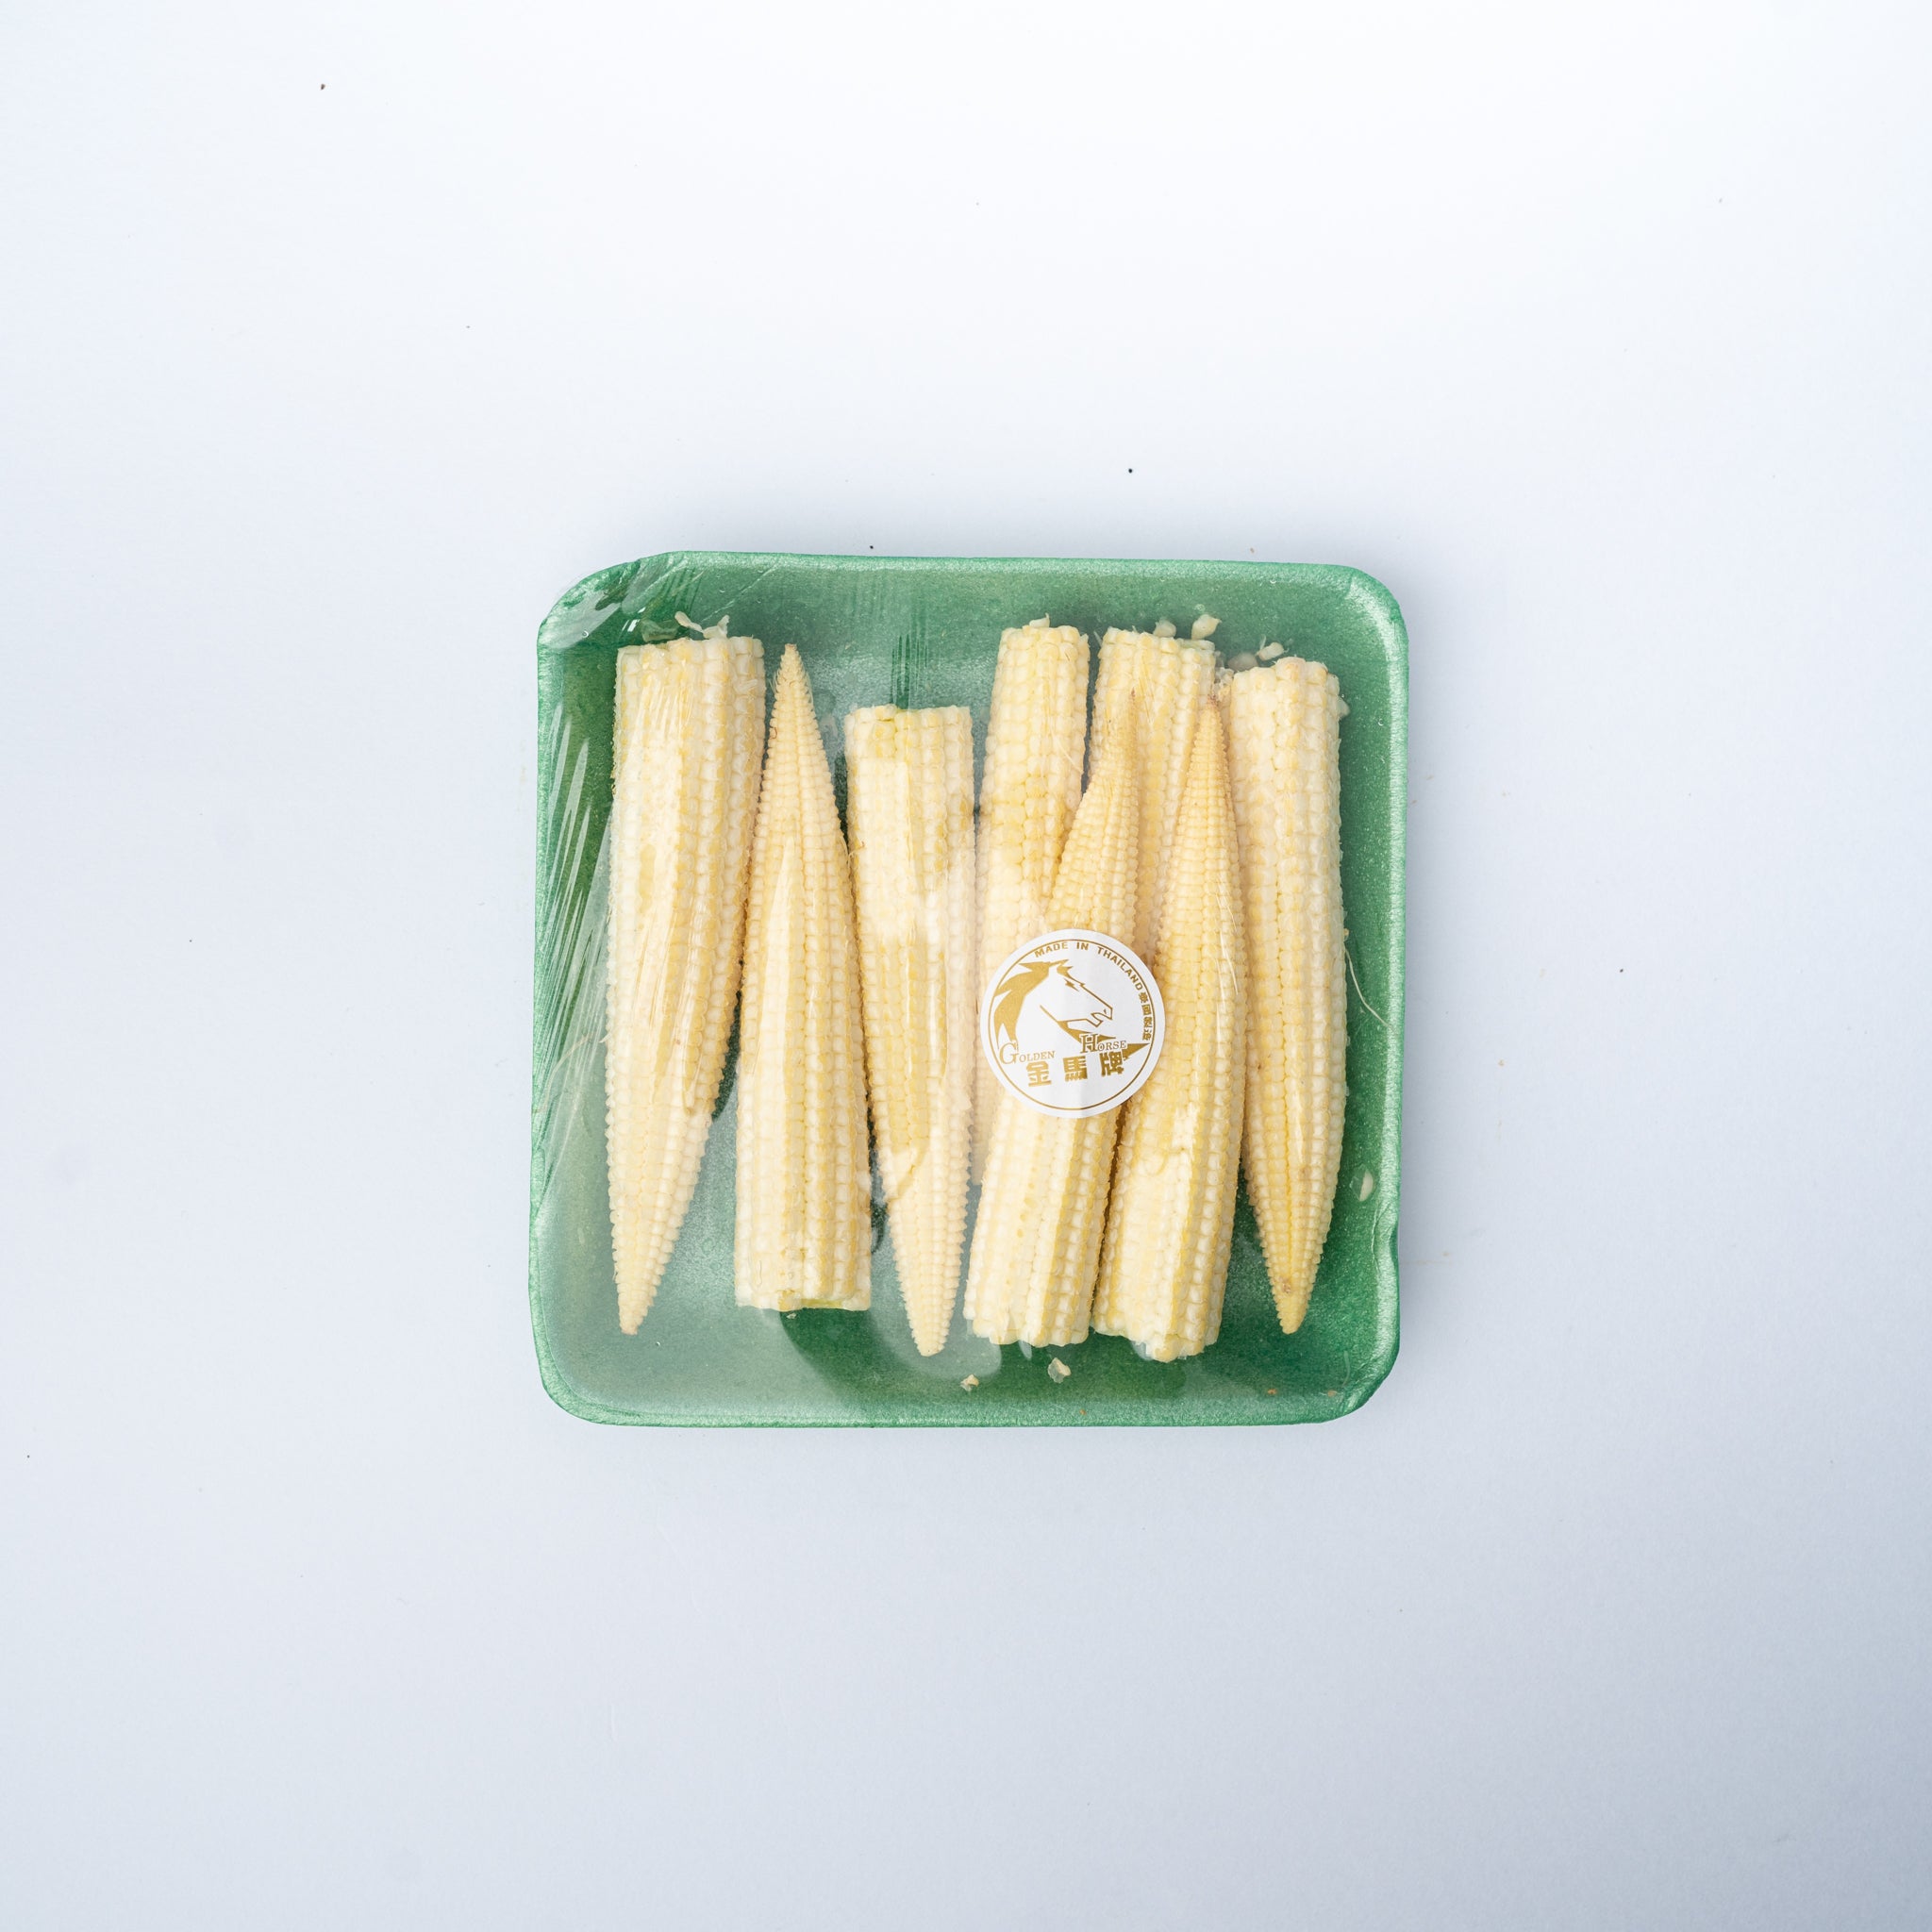 A 120g pack of baby sweetcorn.